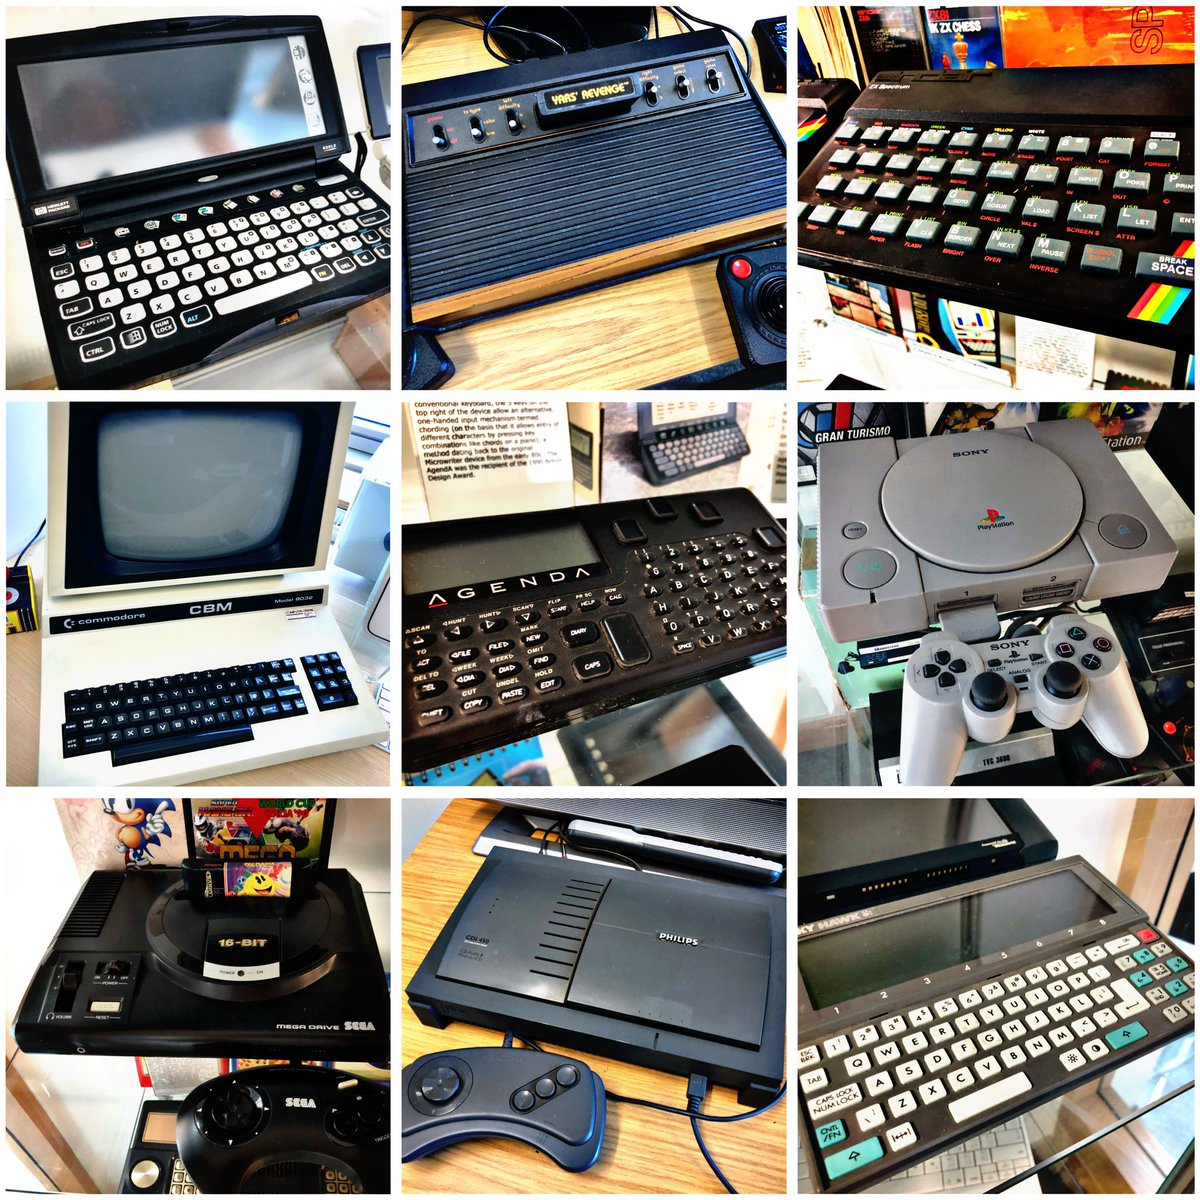 This week’s #RetroEnnead offers you the #620LX, #AtariVCS, #ZXSpectrum, #CBM8032, #AgendA, #PlayStation, #MegaDrive, #CDI450 and #HuskyHawk. Choose a line of 3 and lose the rest! #RetroComputing #ComputerHistory #RetroGaming #VideoGames